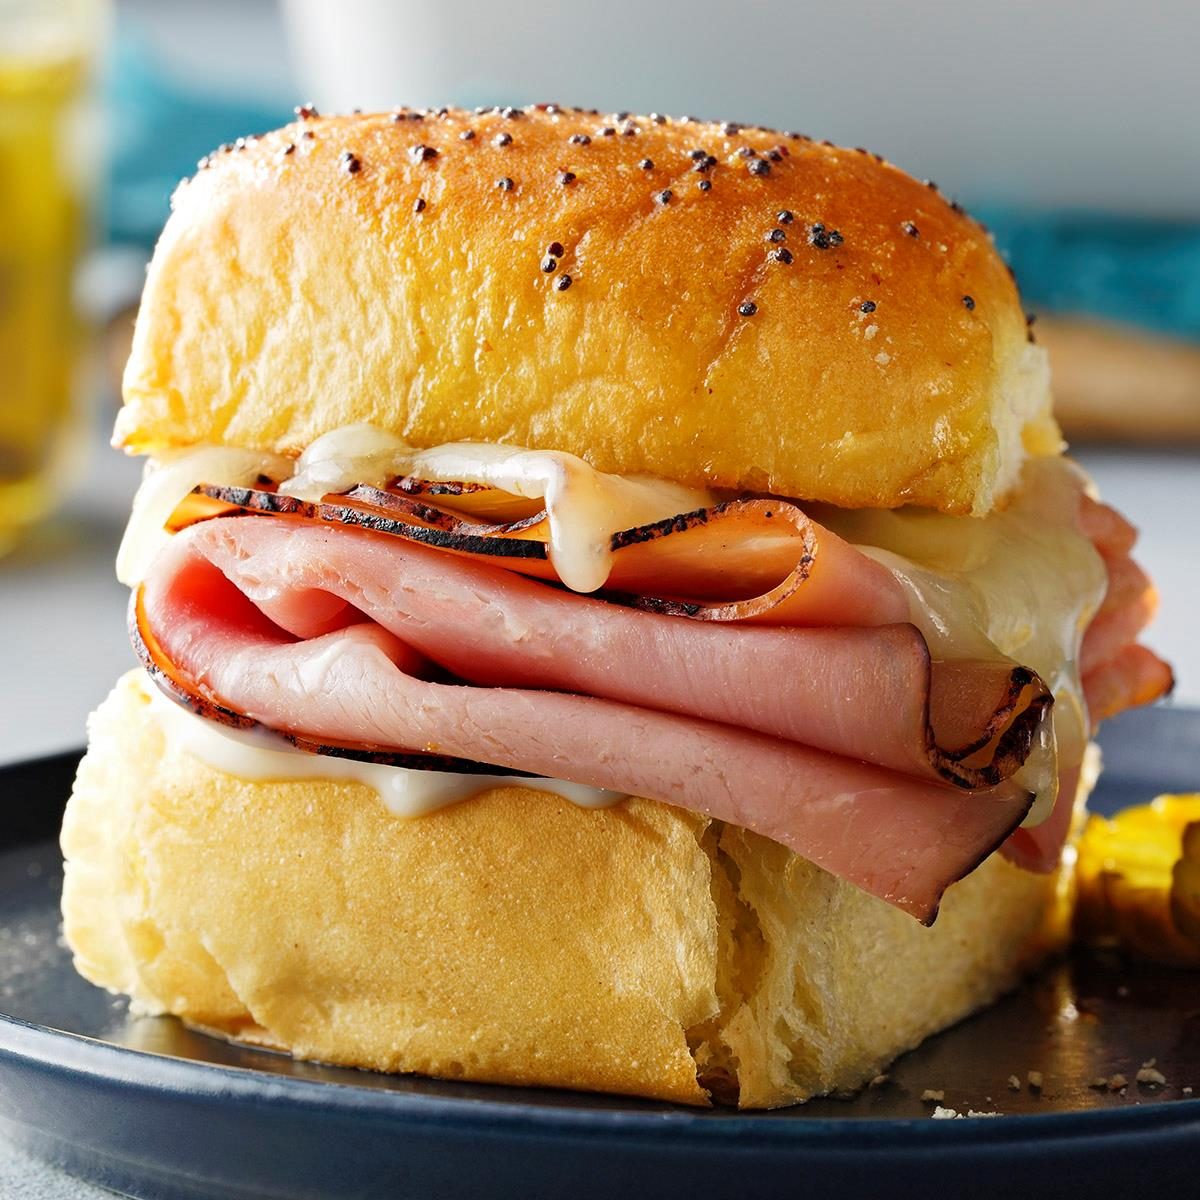 20 Things to Make in a Sandwich Maker That Aren't Sandwiches